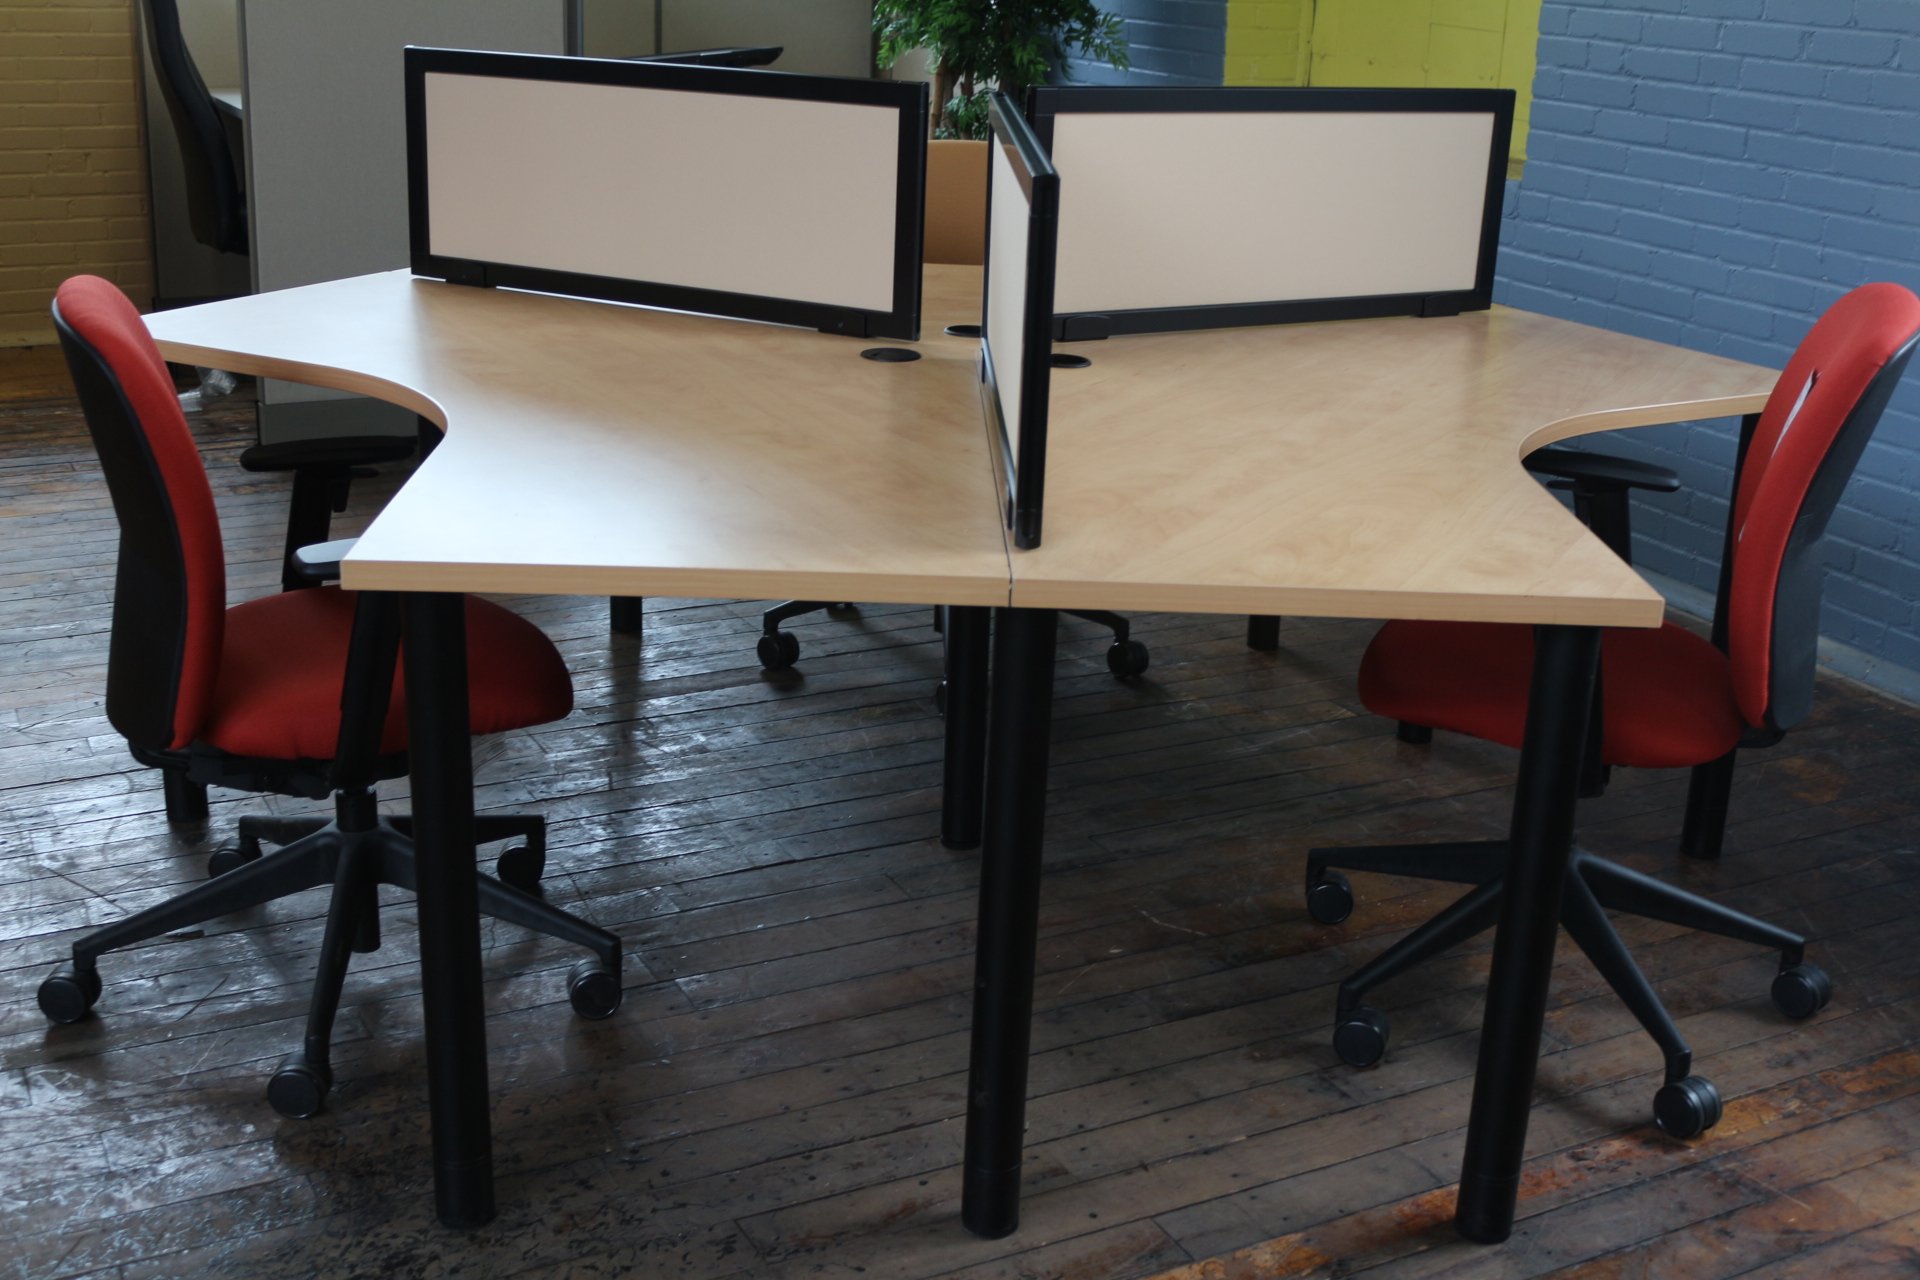 Open plan workstations with Turnstone worksurfaces